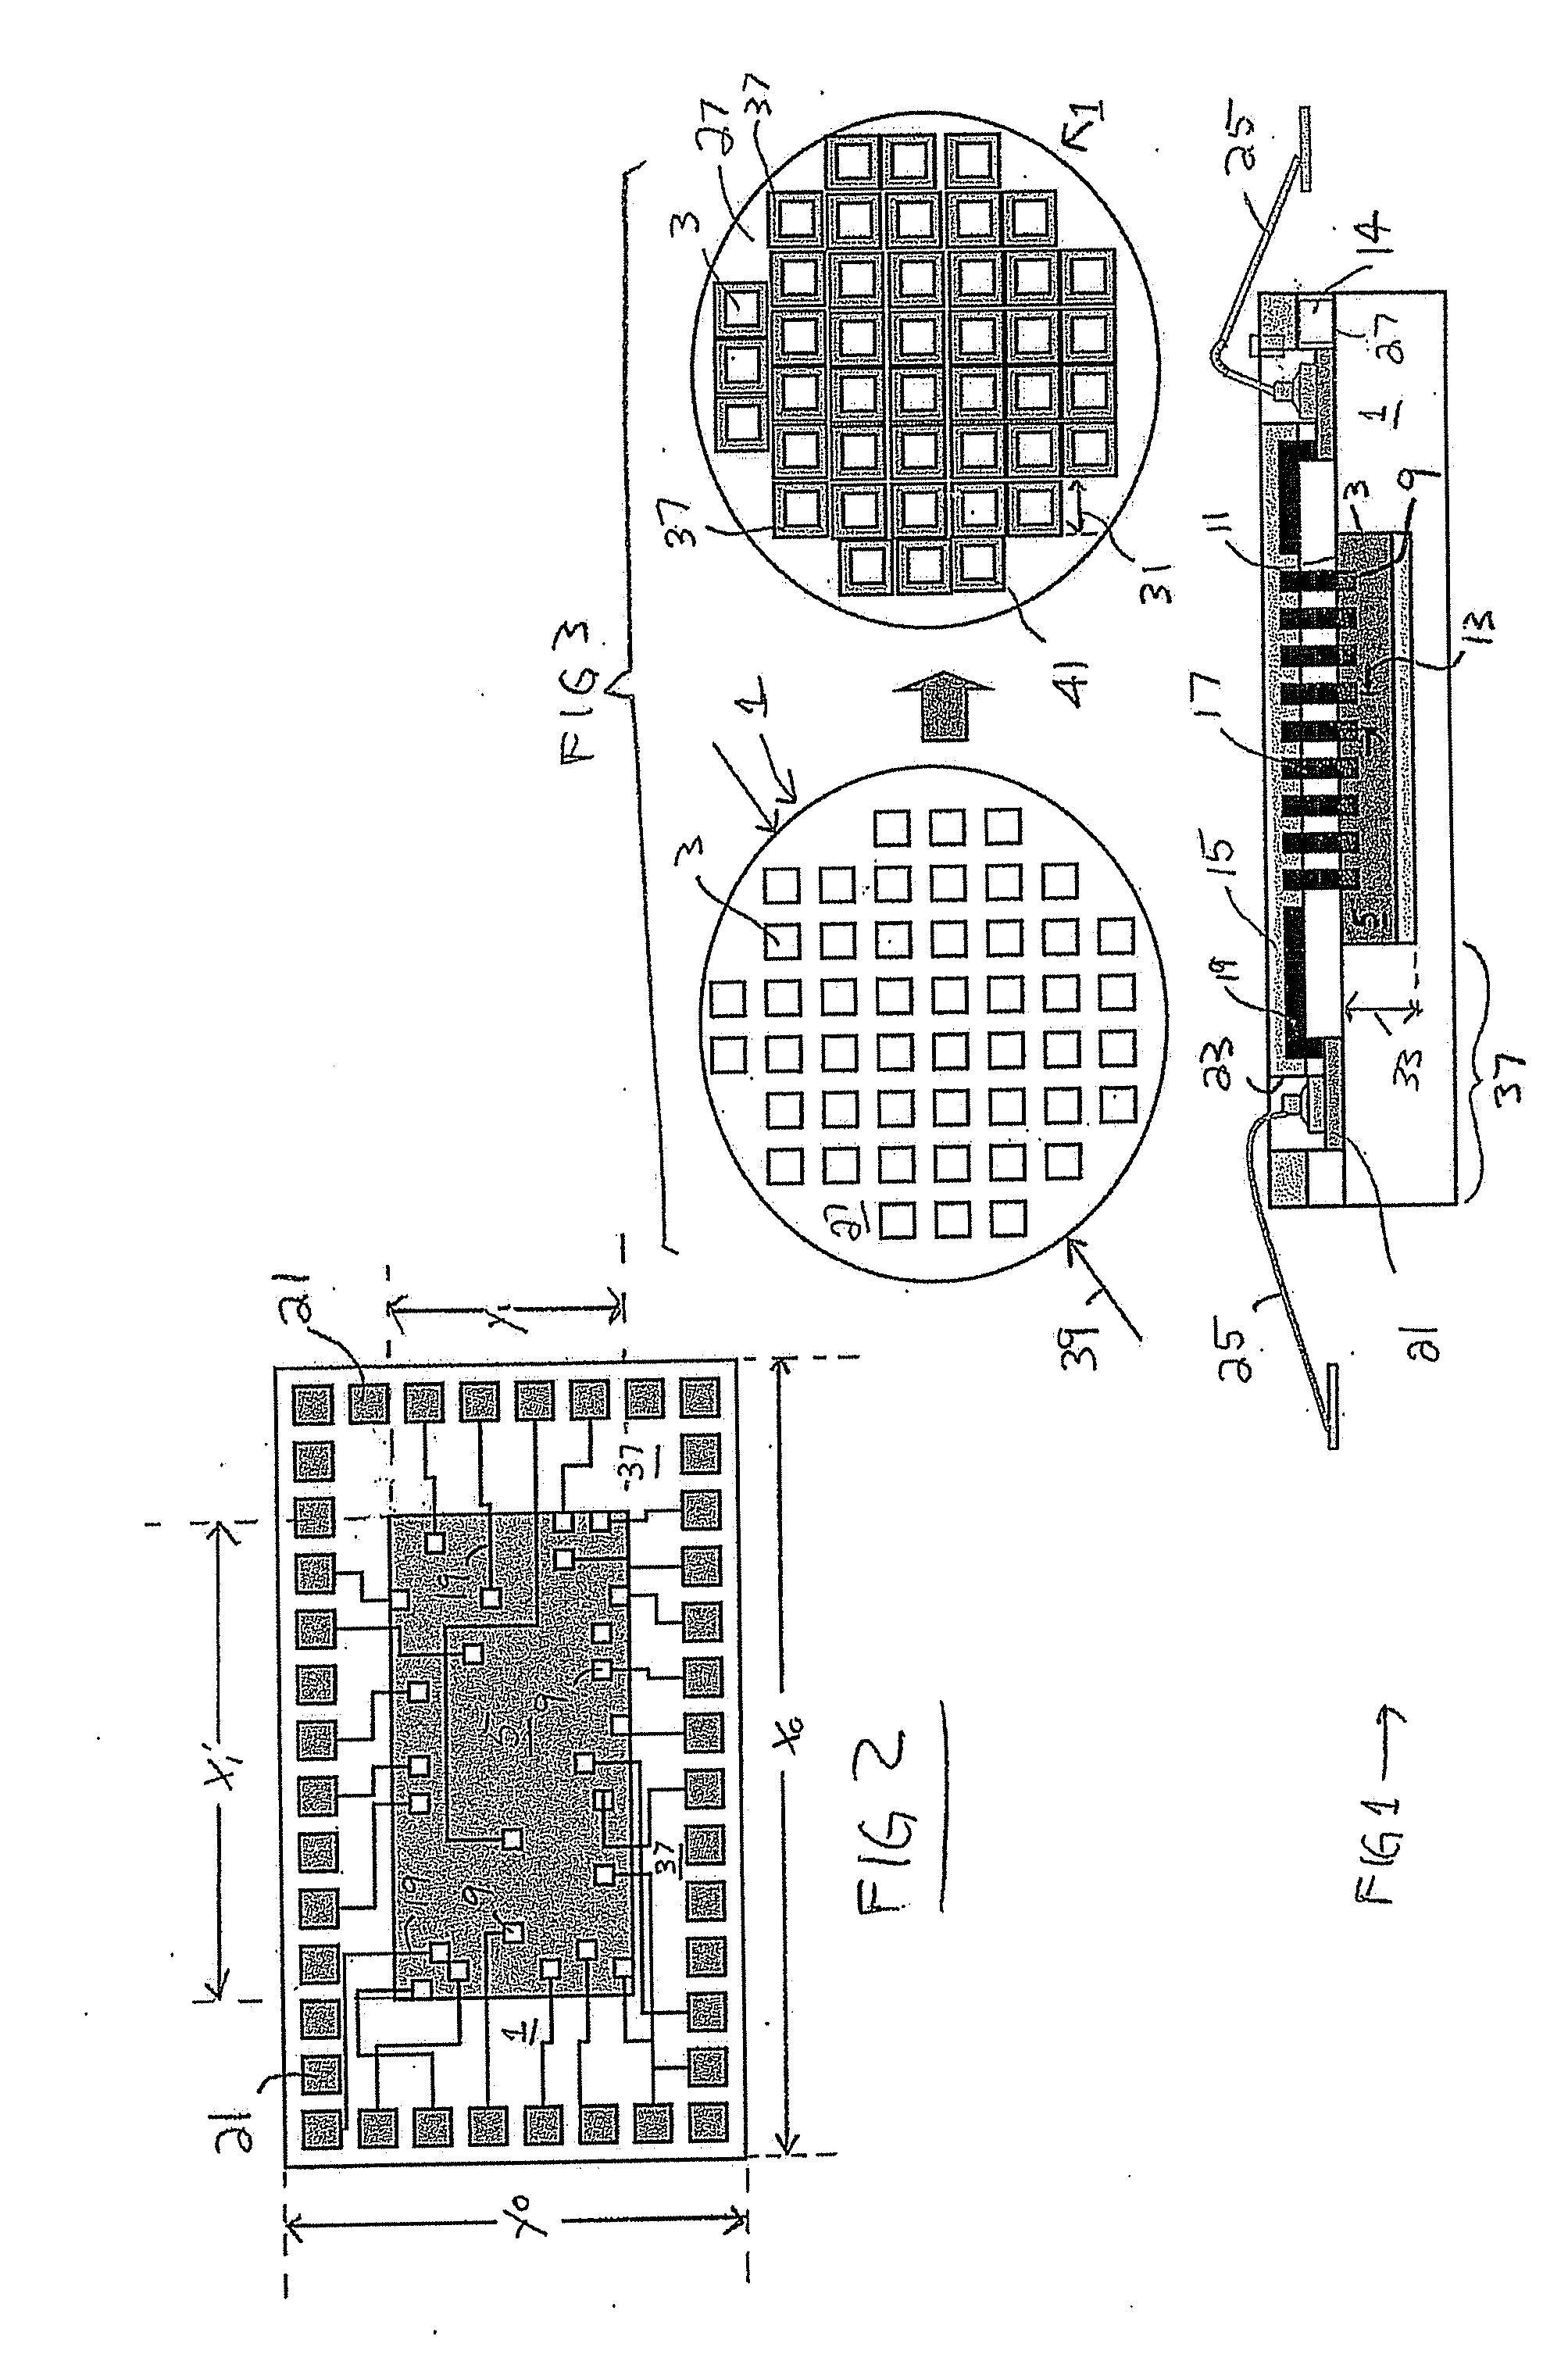 Chip holder with wafer level redistribution layer